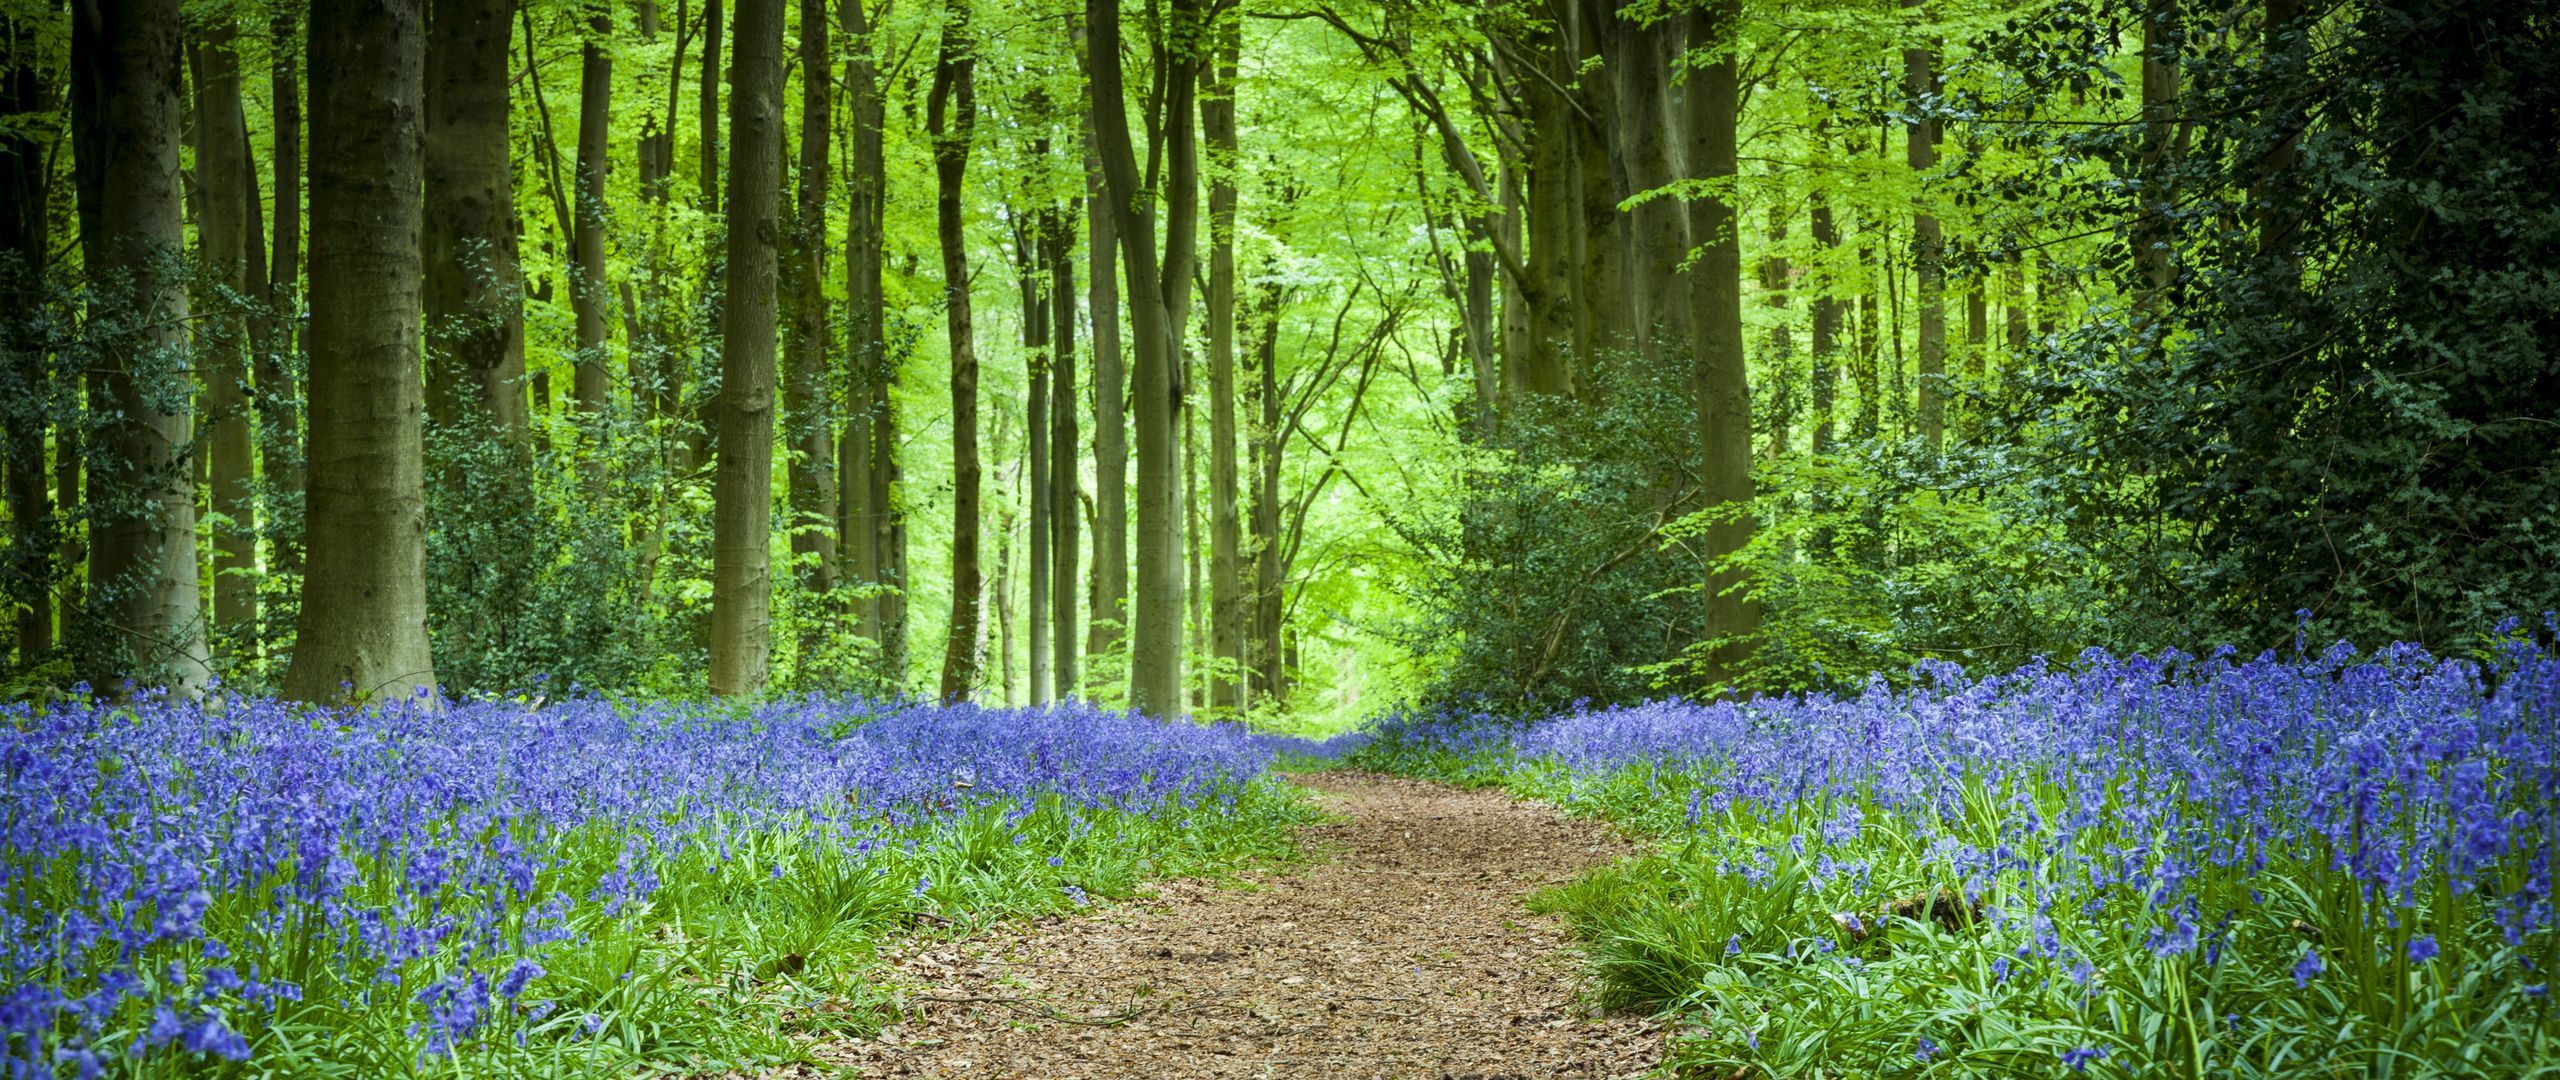 Download wallpaper 2560x1080 forest, path, flowers, spring dual wide 1080p HD background